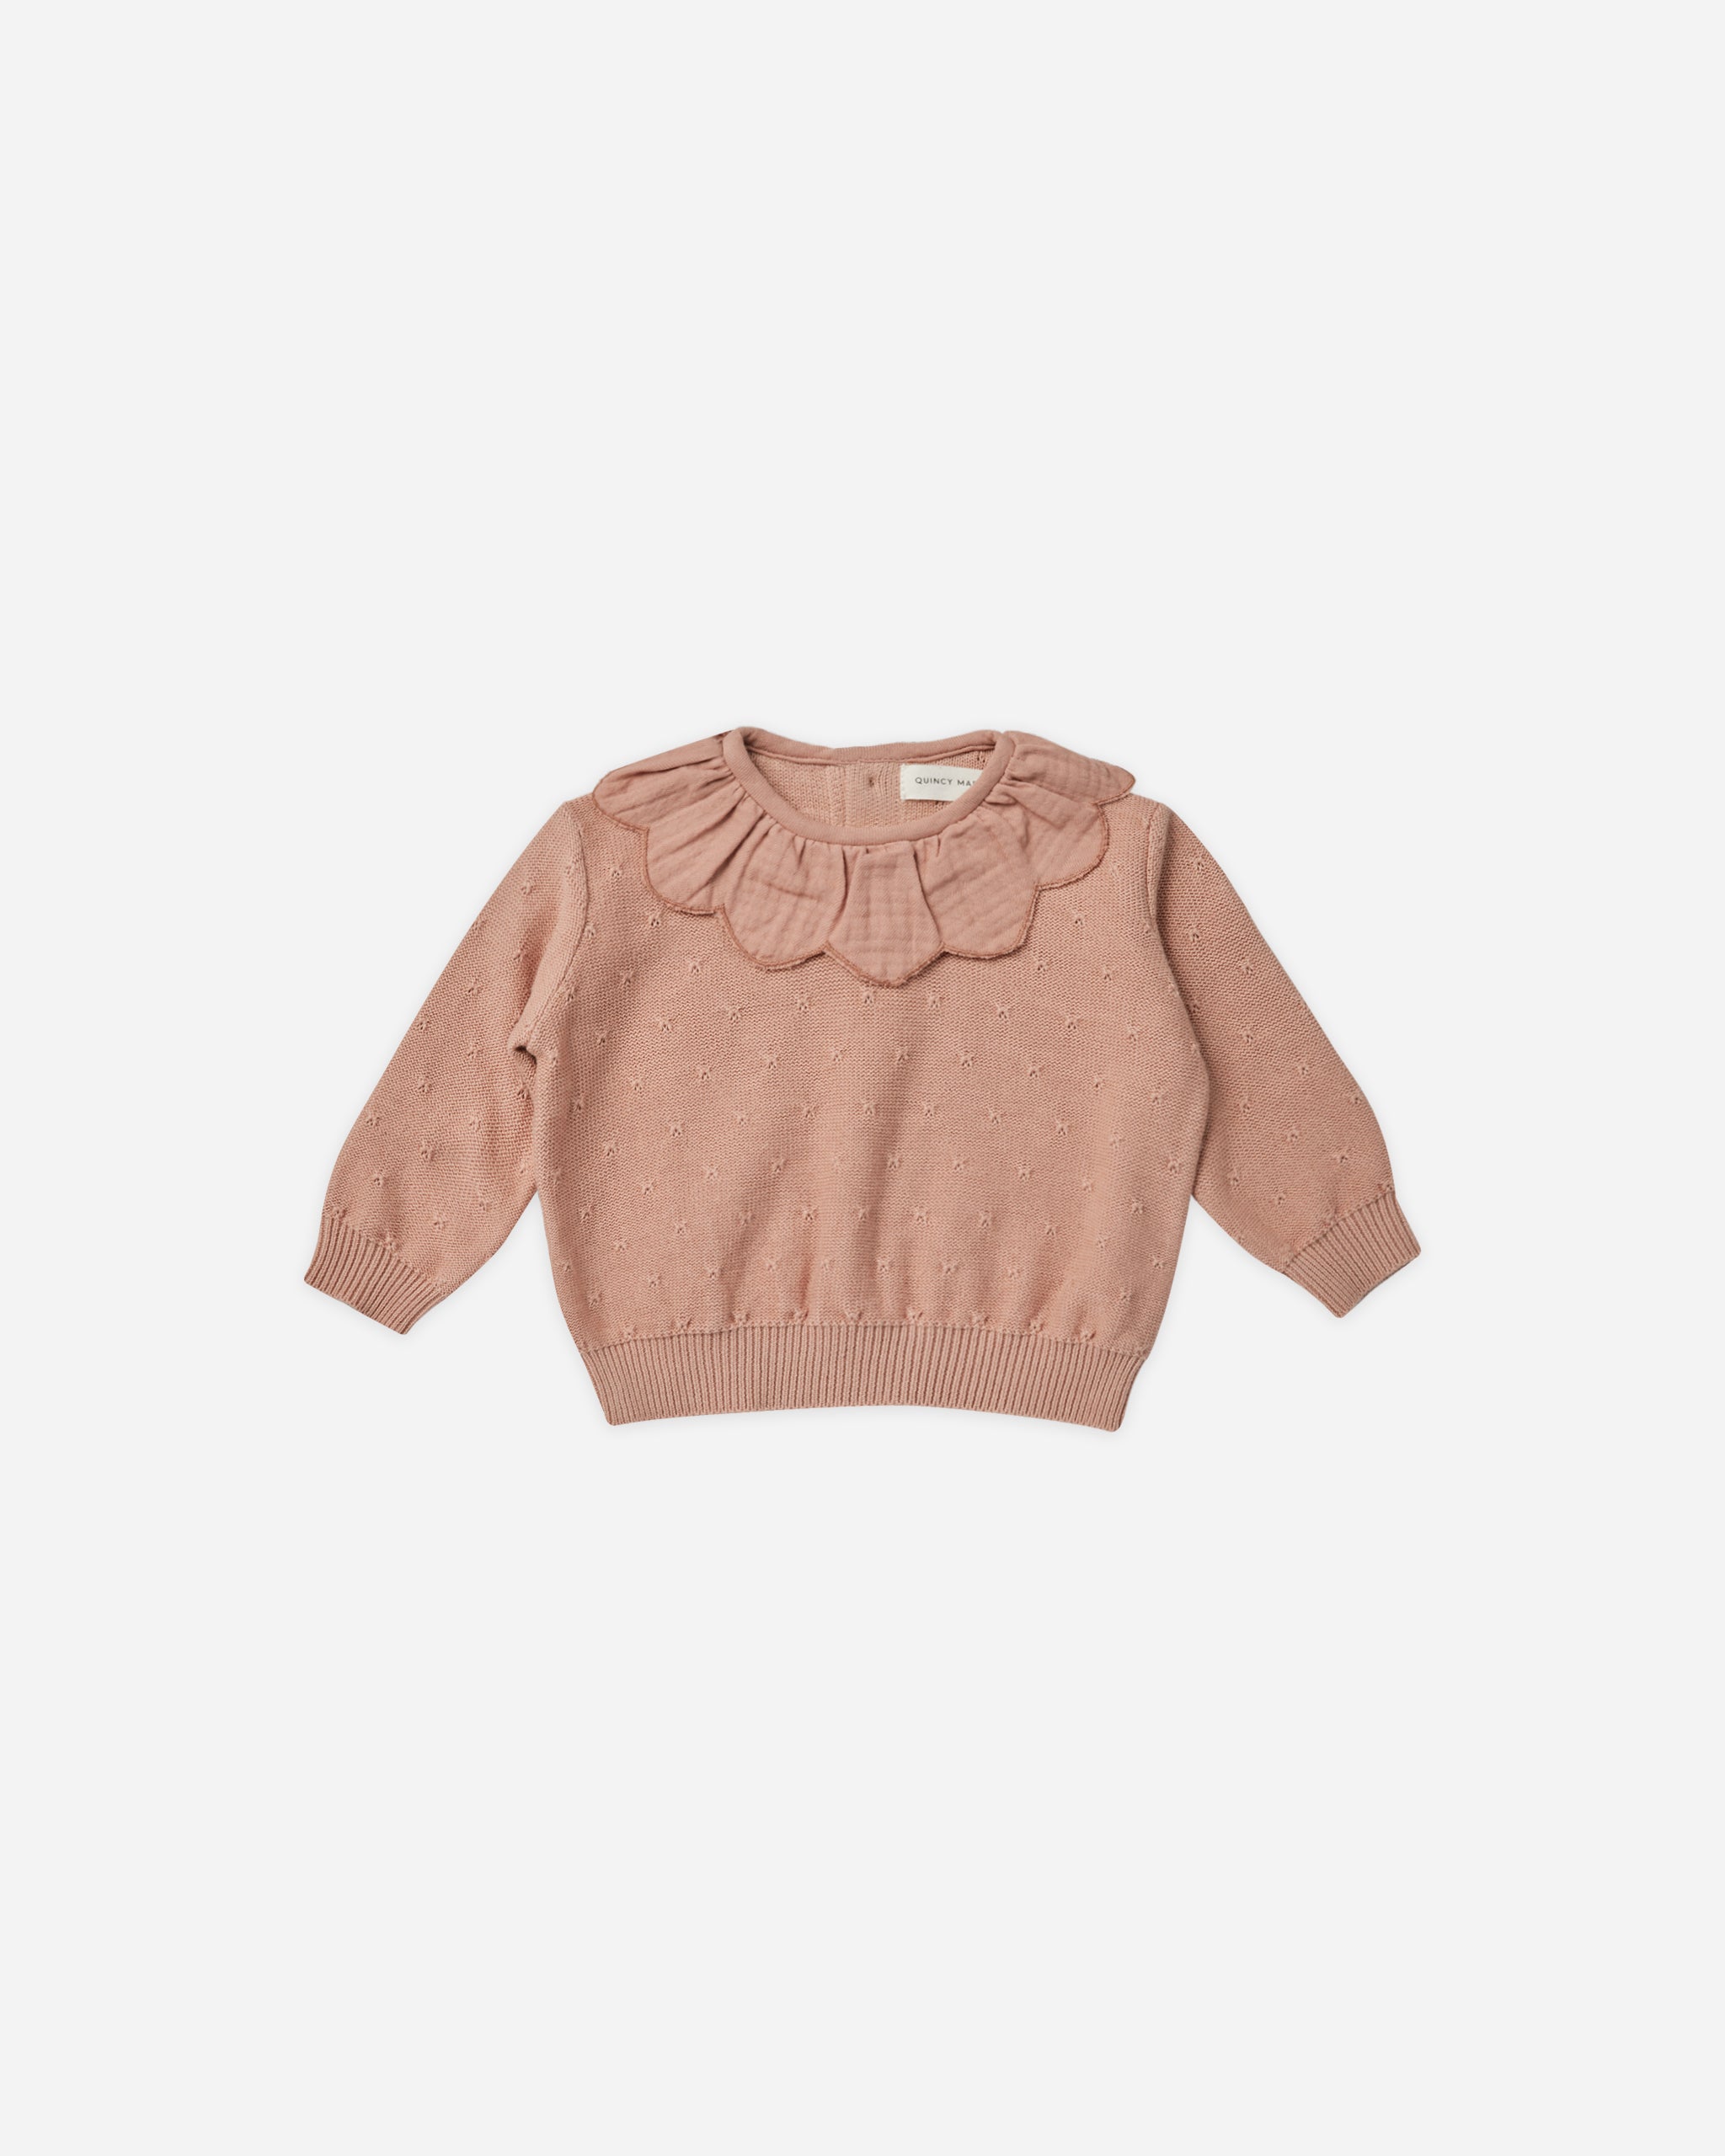 Petal Knit Sweater || Rose - Rylee + Cru | Kids Clothes | Trendy Baby Clothes | Modern Infant Outfits |